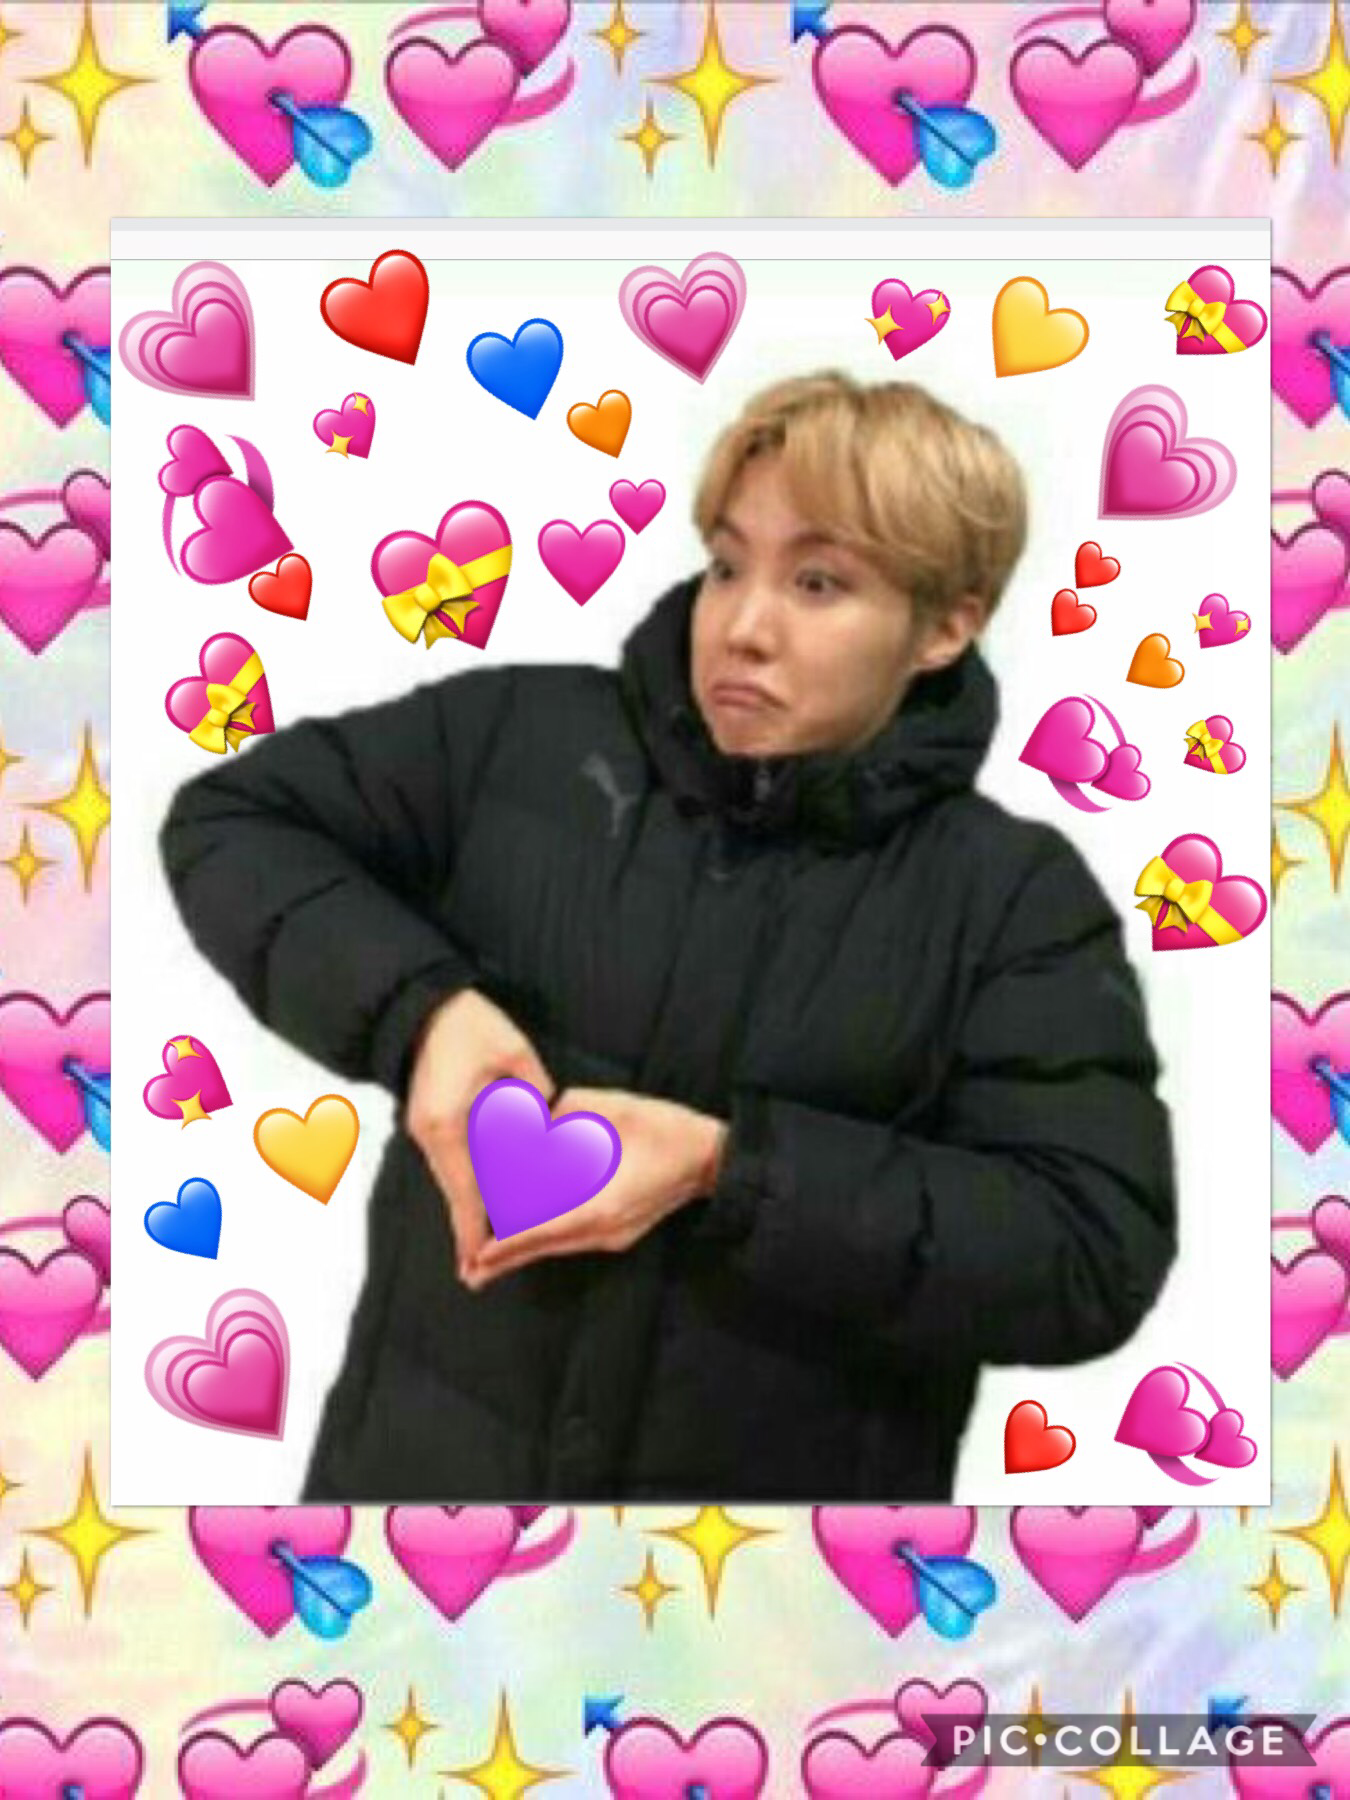 This is for everyone who follows me and likes my edits (i don't have that many followers but still) 💜 especially everyone who comments nice things that make me feel better 🤧. ILY (i've only actually been using pc for less than a month so thx for following